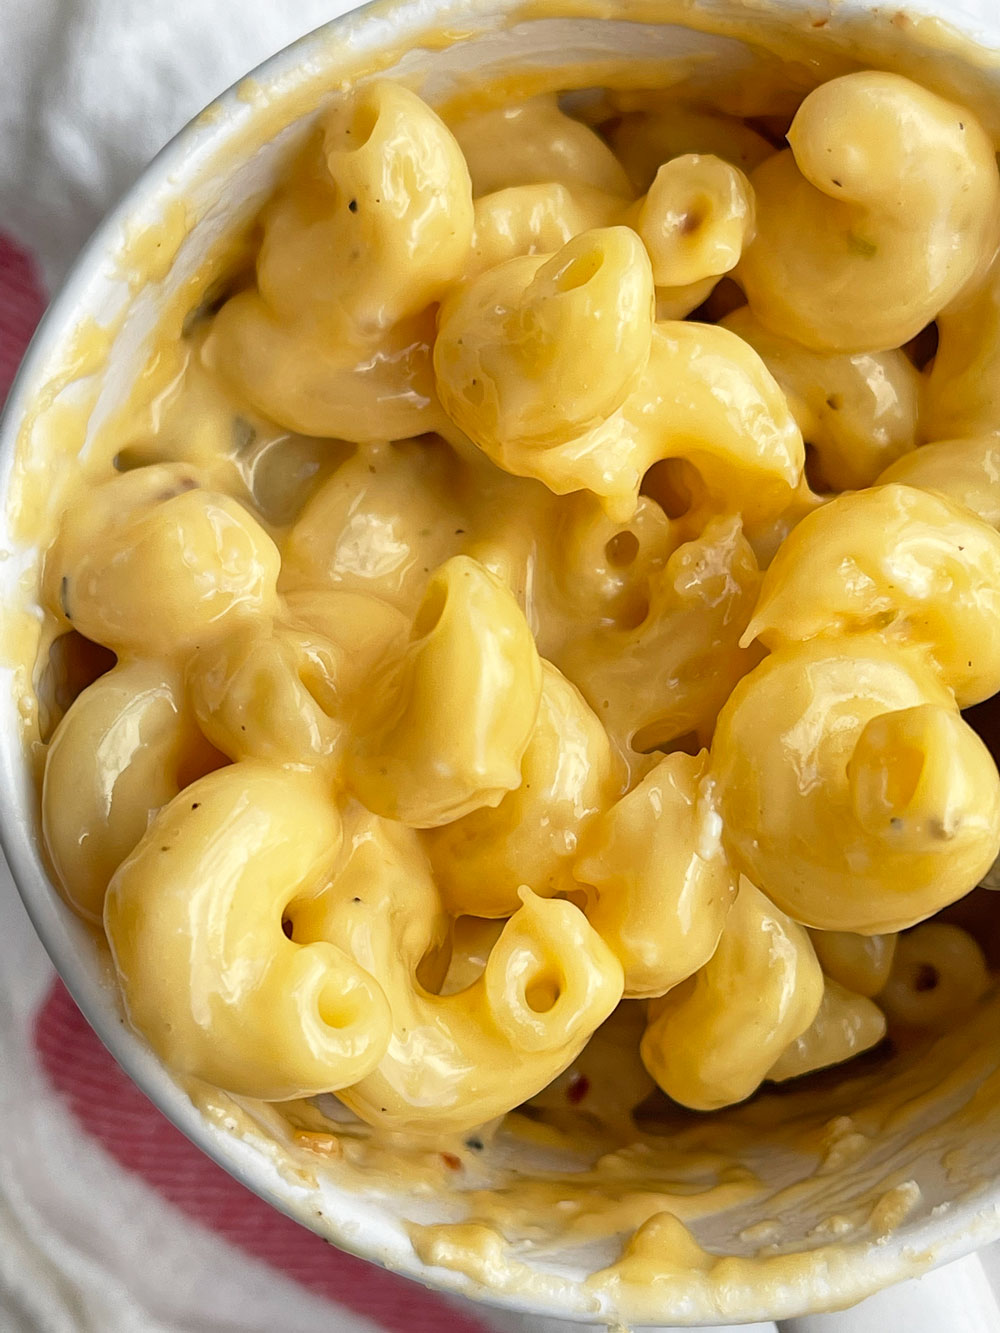 Microwave Mug Mac and Cheese. This is an easy recipe for midnight pasta cravings, easy dinner ideas, or someone who cooks for 1. Happy Pasta Making! www.ChopHappy.com #Macandcheesehack #mugmacandcheese